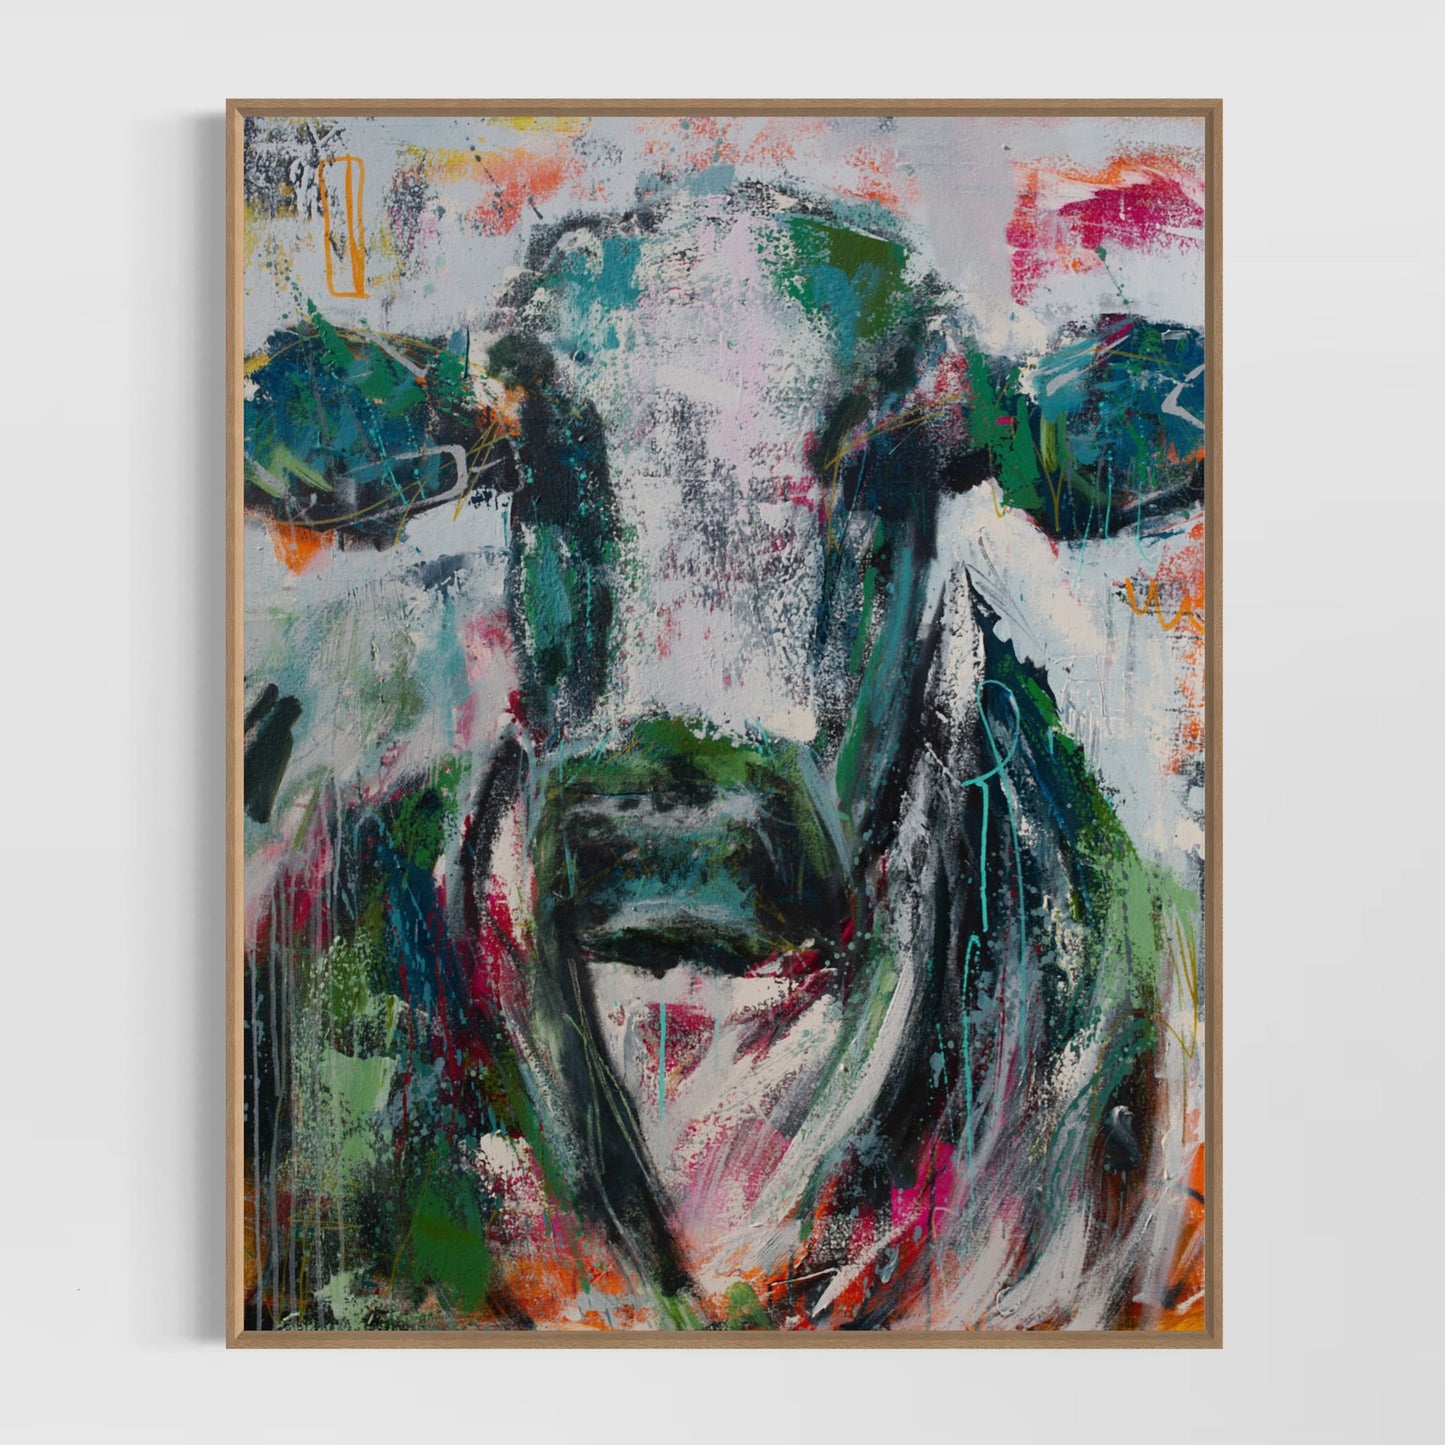 Max - Abstract Cow by Australian Artist Rose Hewartson Original Abstract Painting on Canvas Framed 96x123 cm Statement Piece